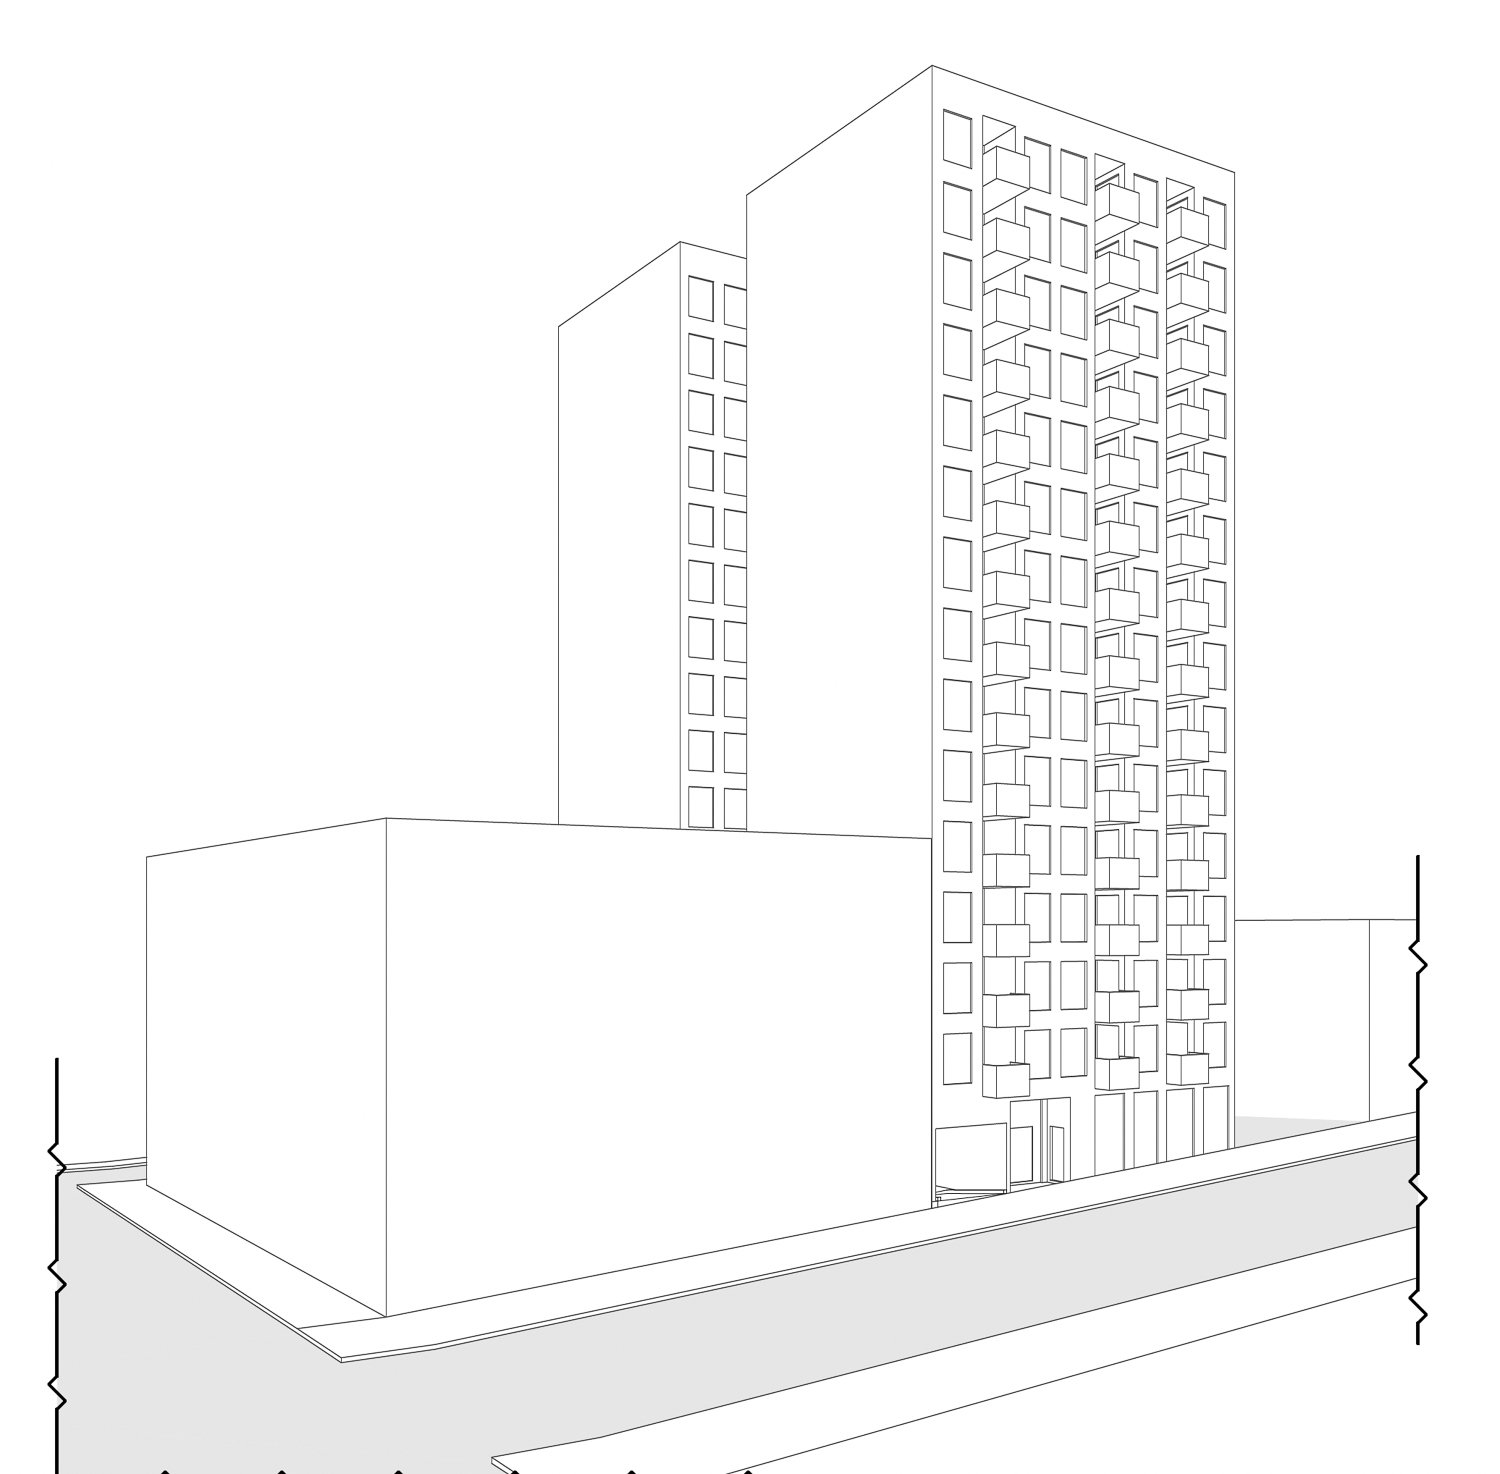 819 Ellis Street 15-story iteration, illustration by RG Architecture